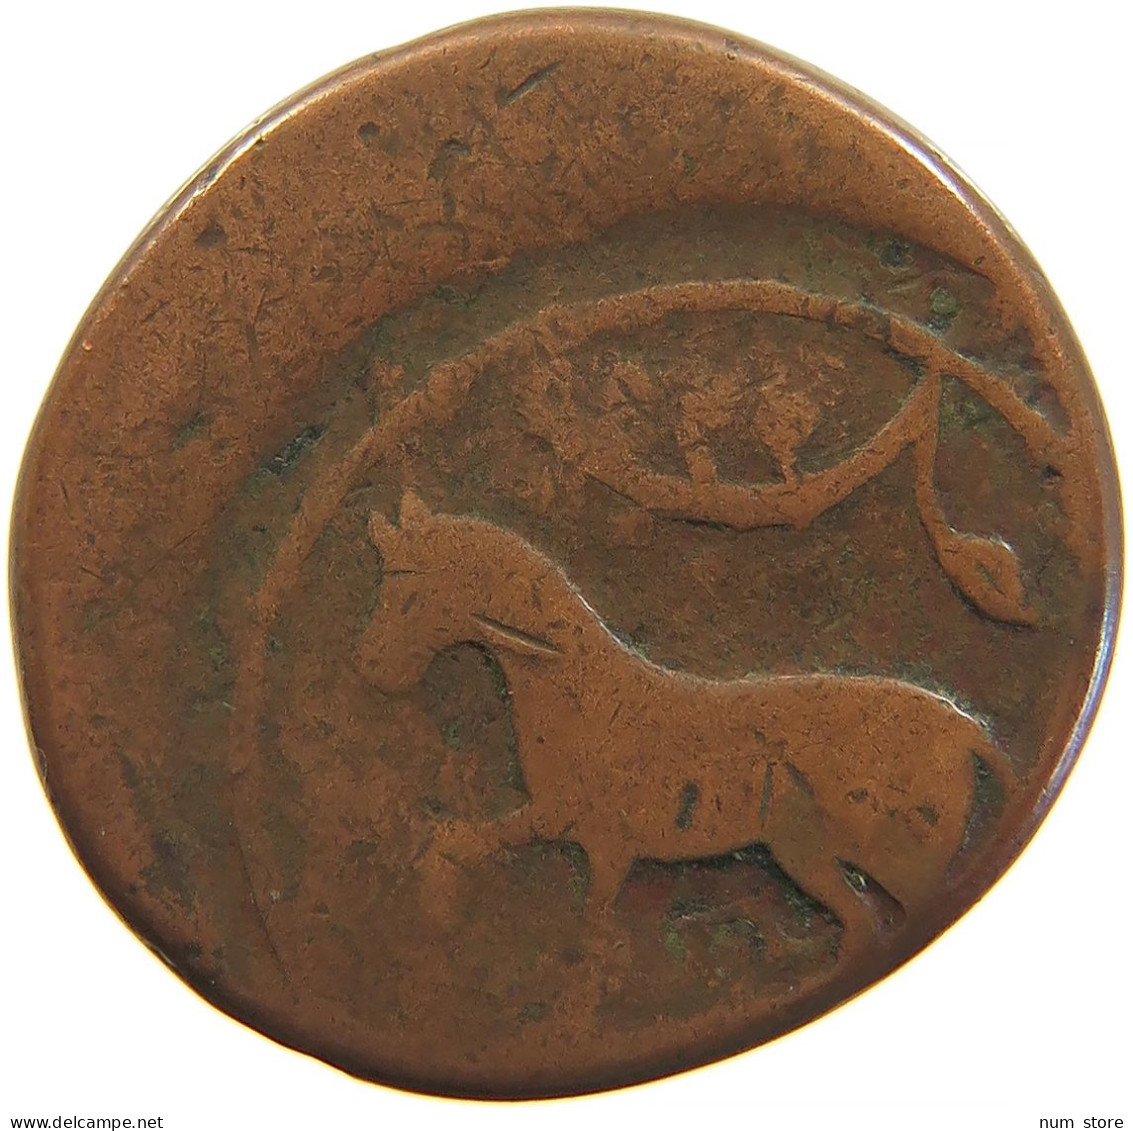 ISLAMIC FALUS FALS HORSE LEFT FIGURATIVE COINAGES IRAN / PERSIA / AFGHANISTAN 25MM 10G #t034 0079 - Irán